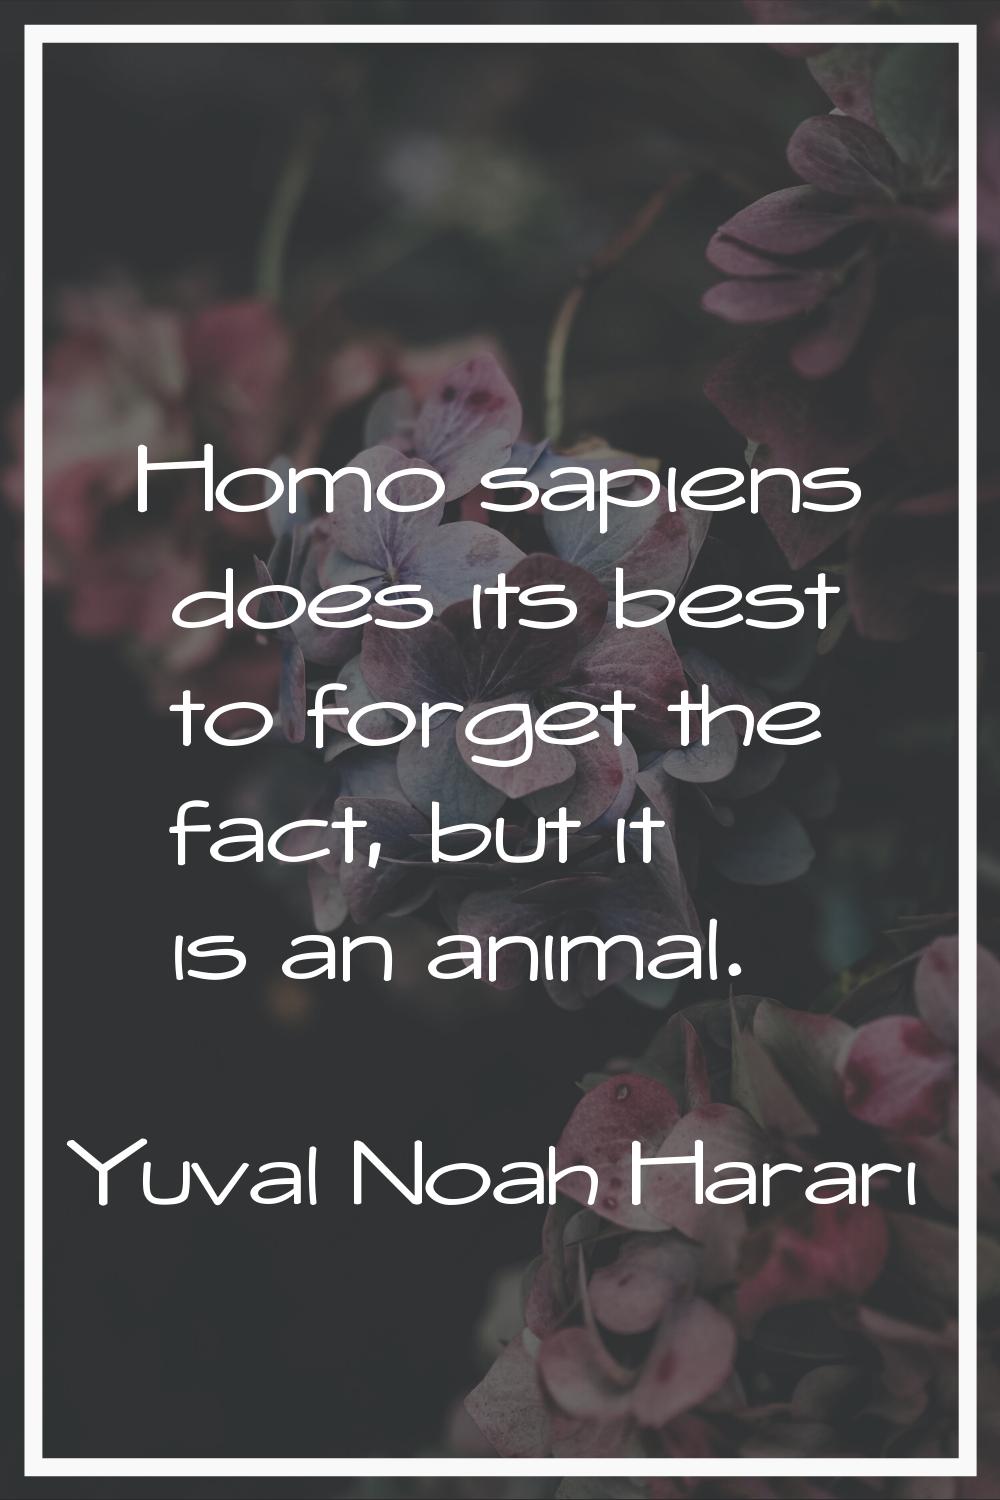 Homo sapiens does its best to forget the fact, but it is an animal.